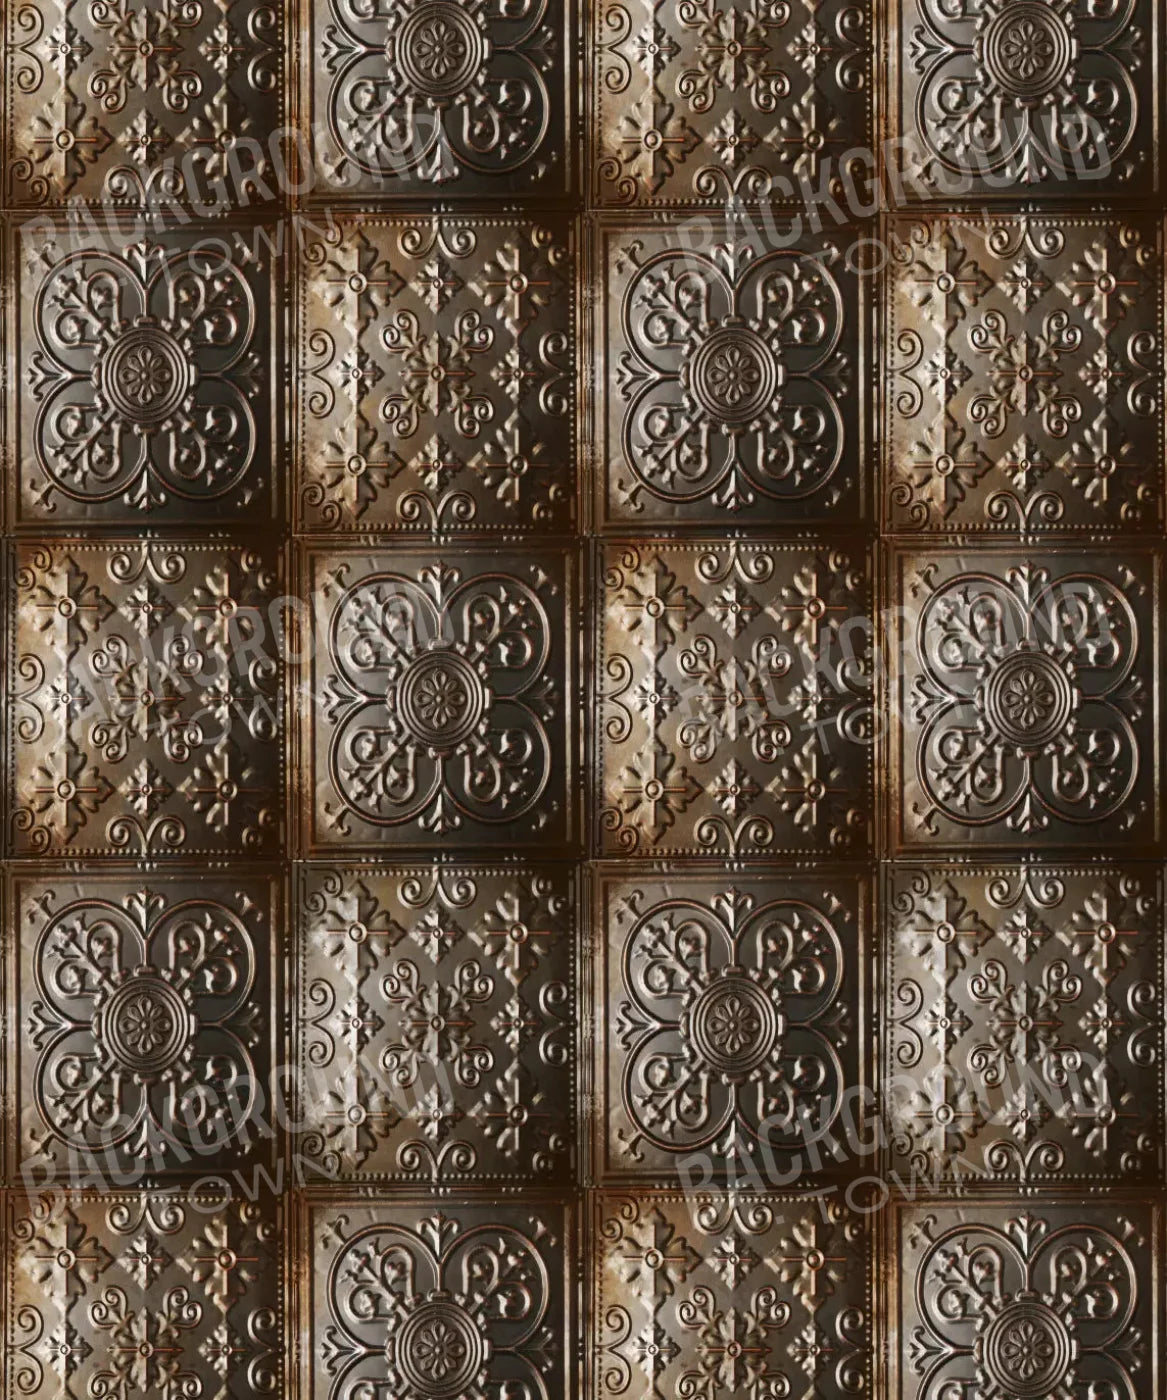 Bronze Metal Tile Backdrop for Photography